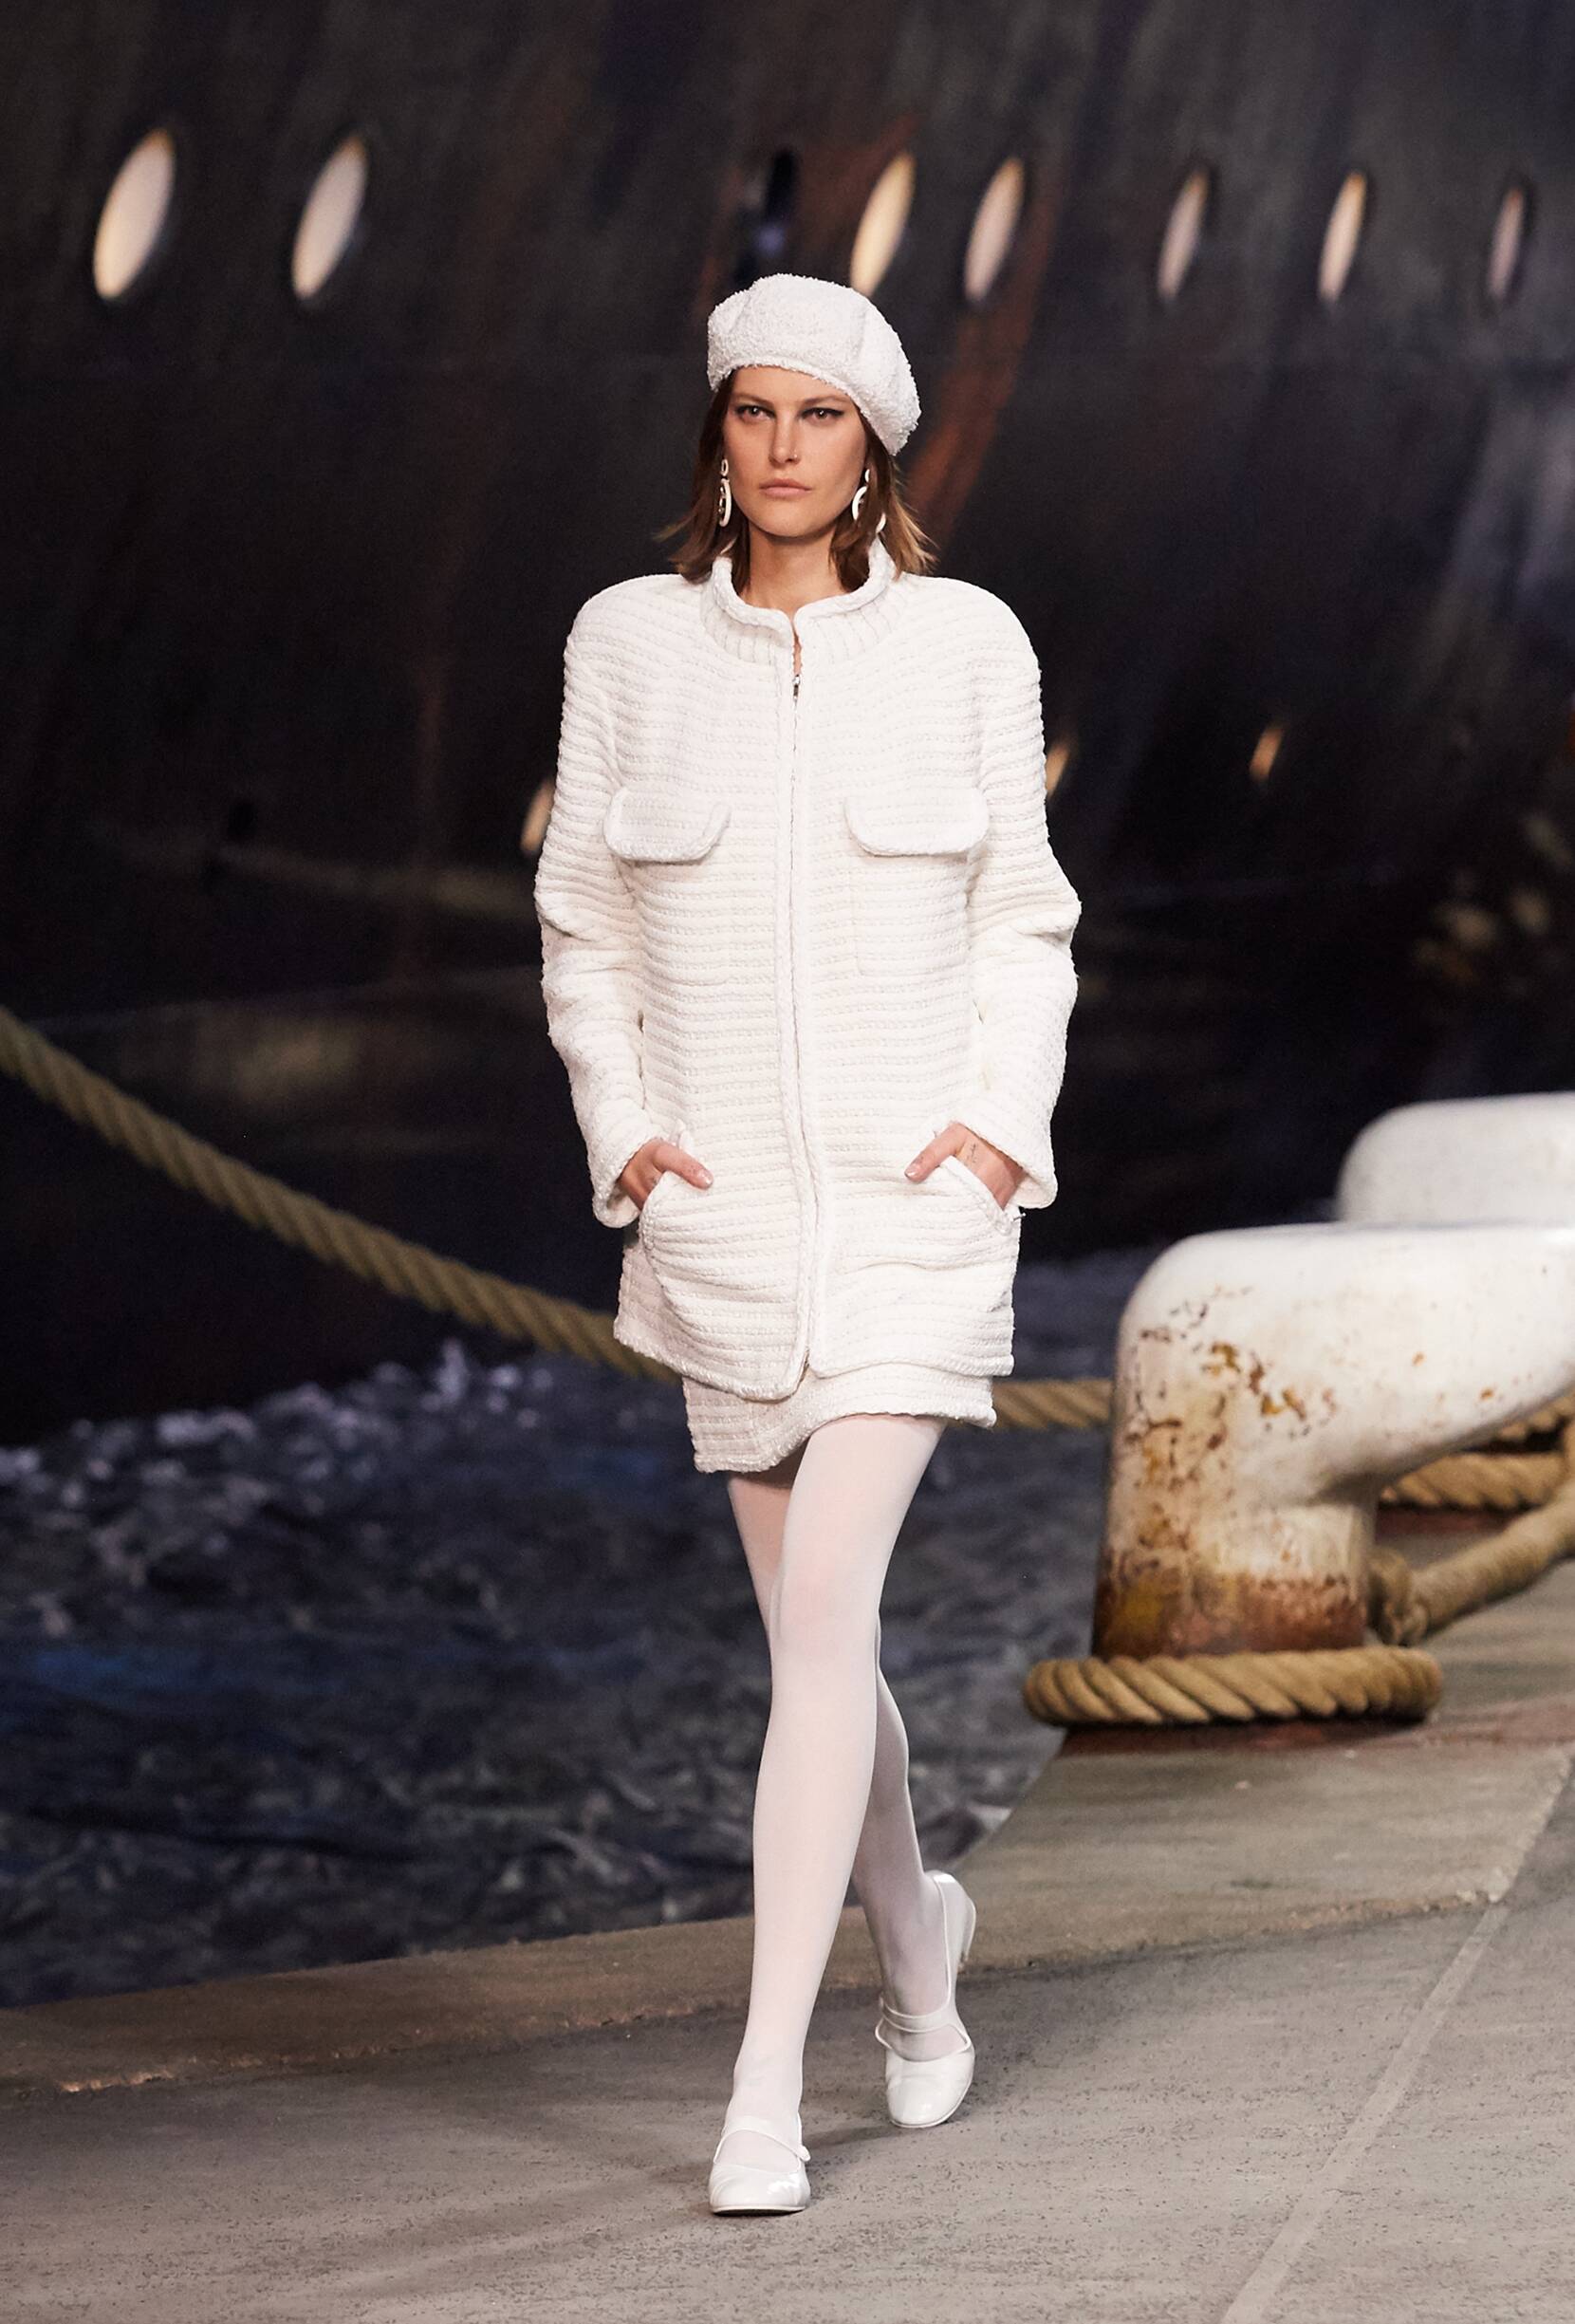 Chanel Cruise Collection 2018-19 Look 7 Paris